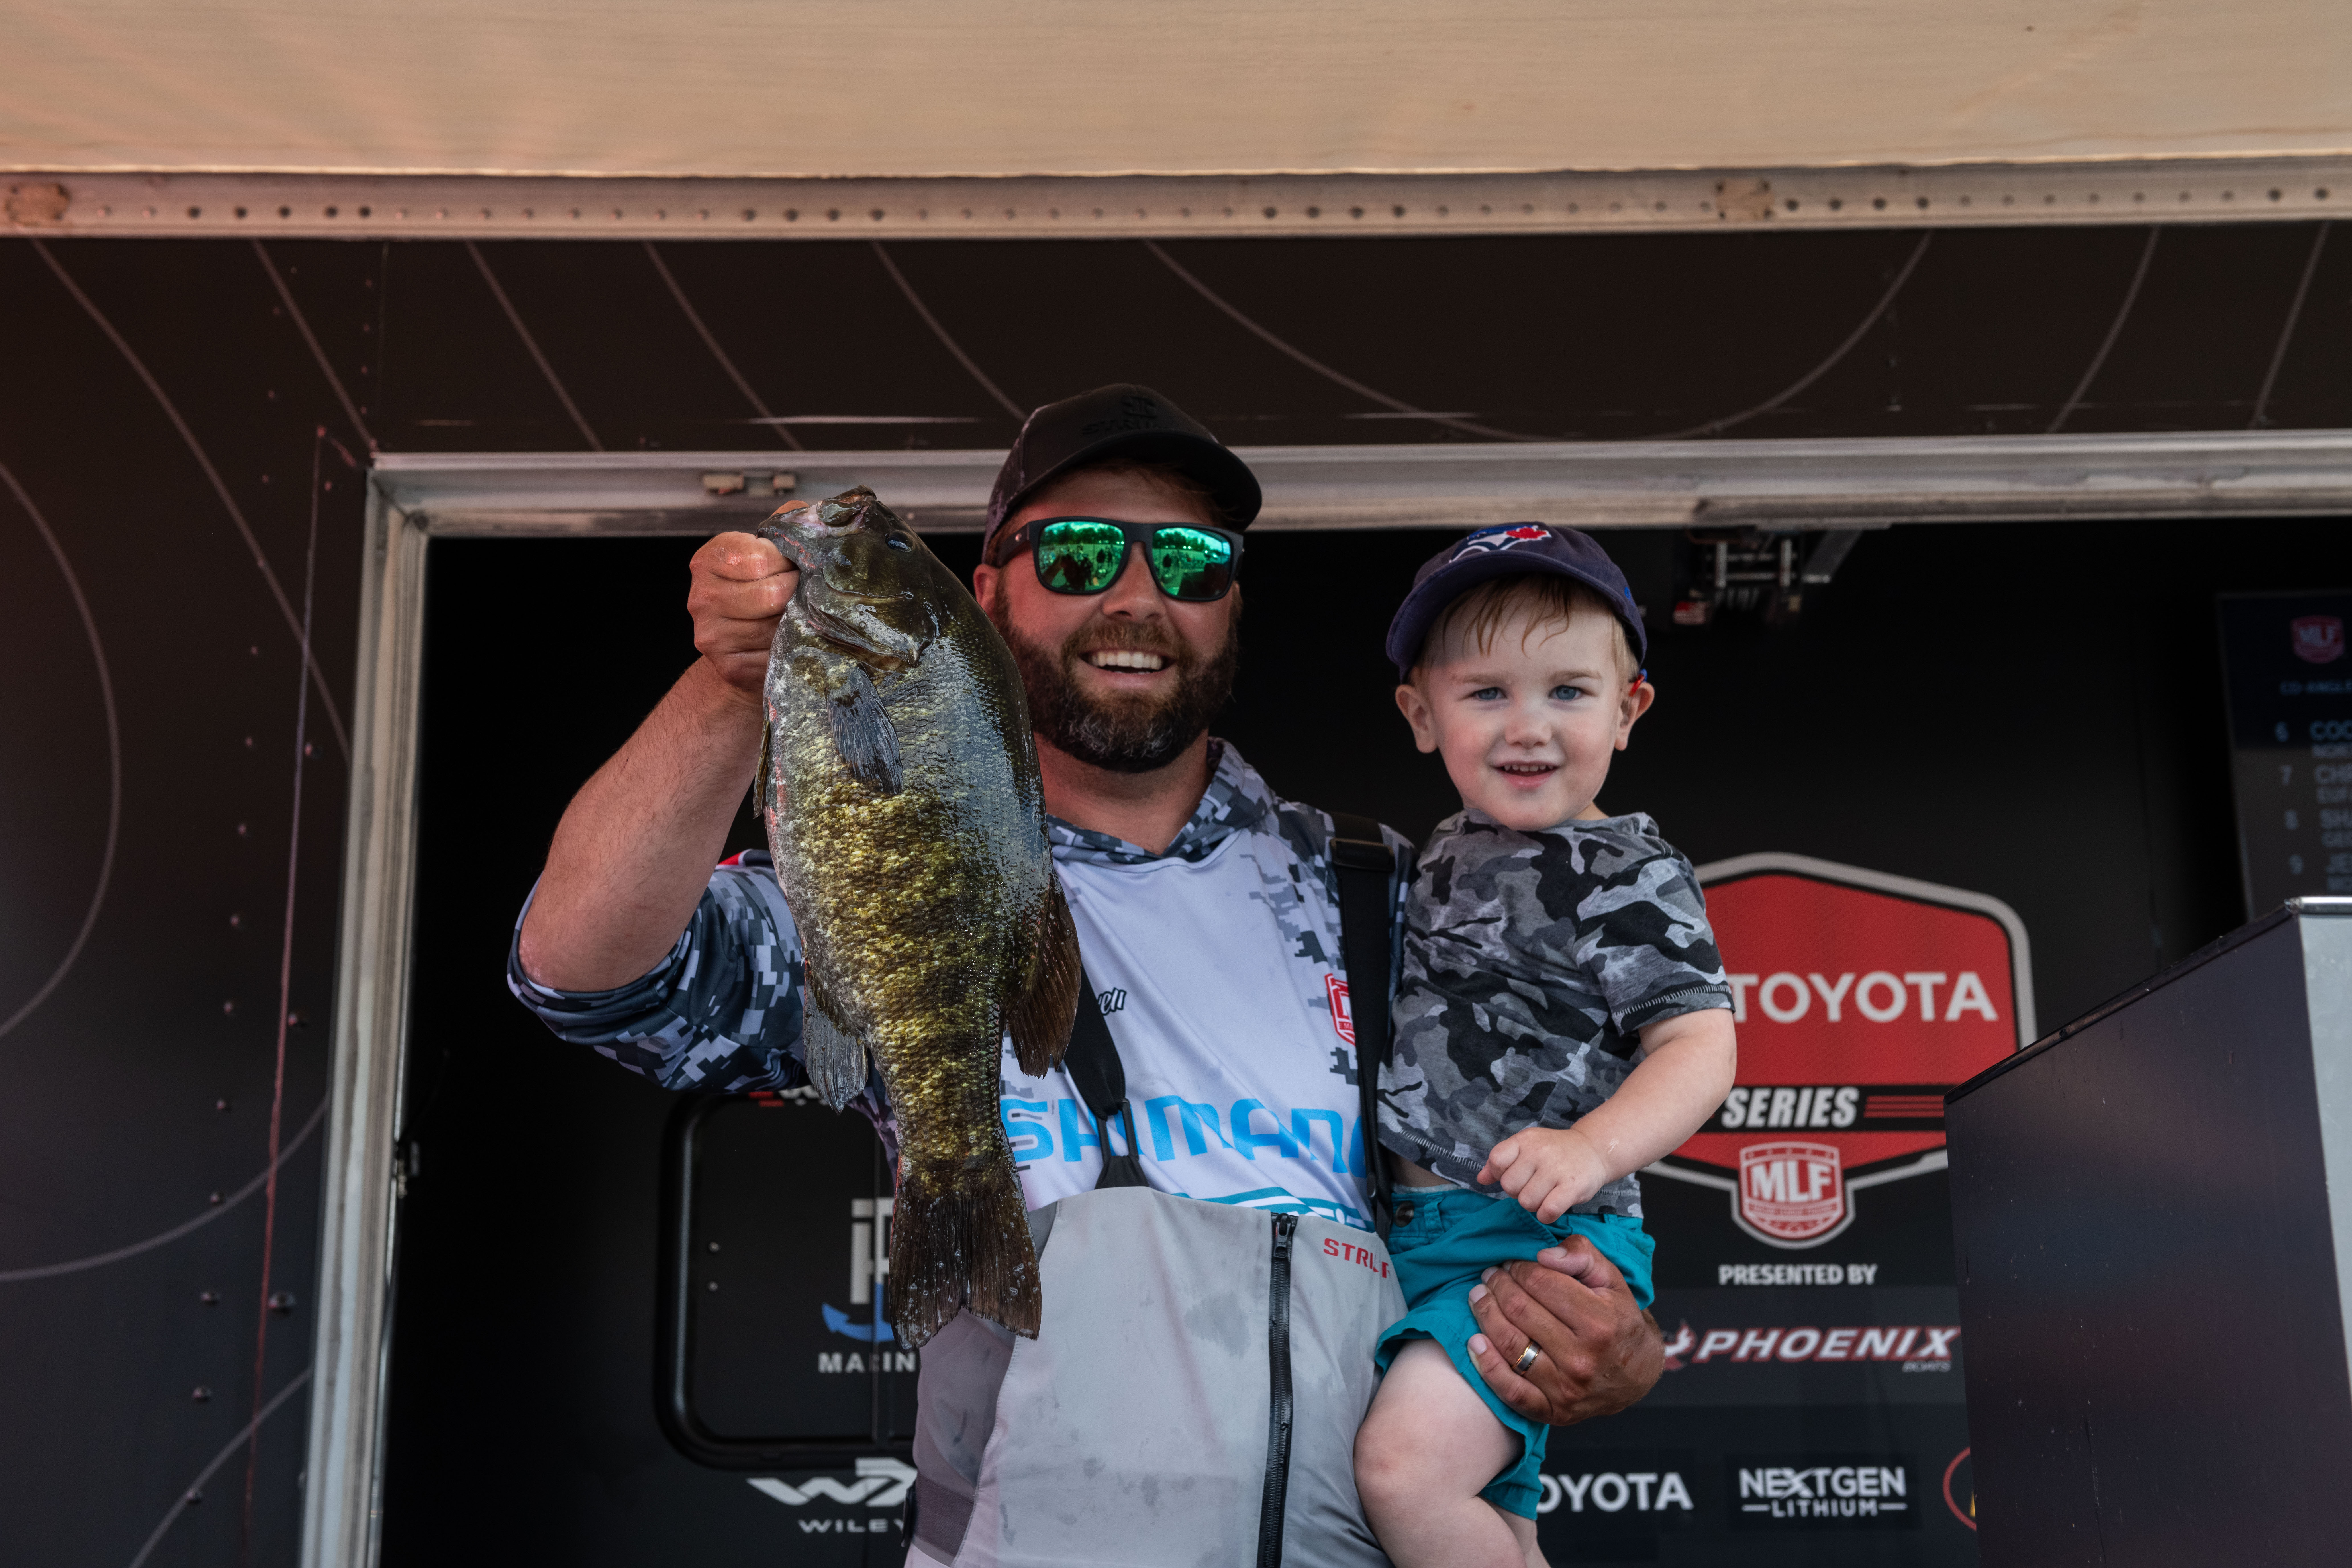 GALLERY: More smallmouth bass from the Day 2 weigh-in at the St. Lawrence  River - Major League Fishing